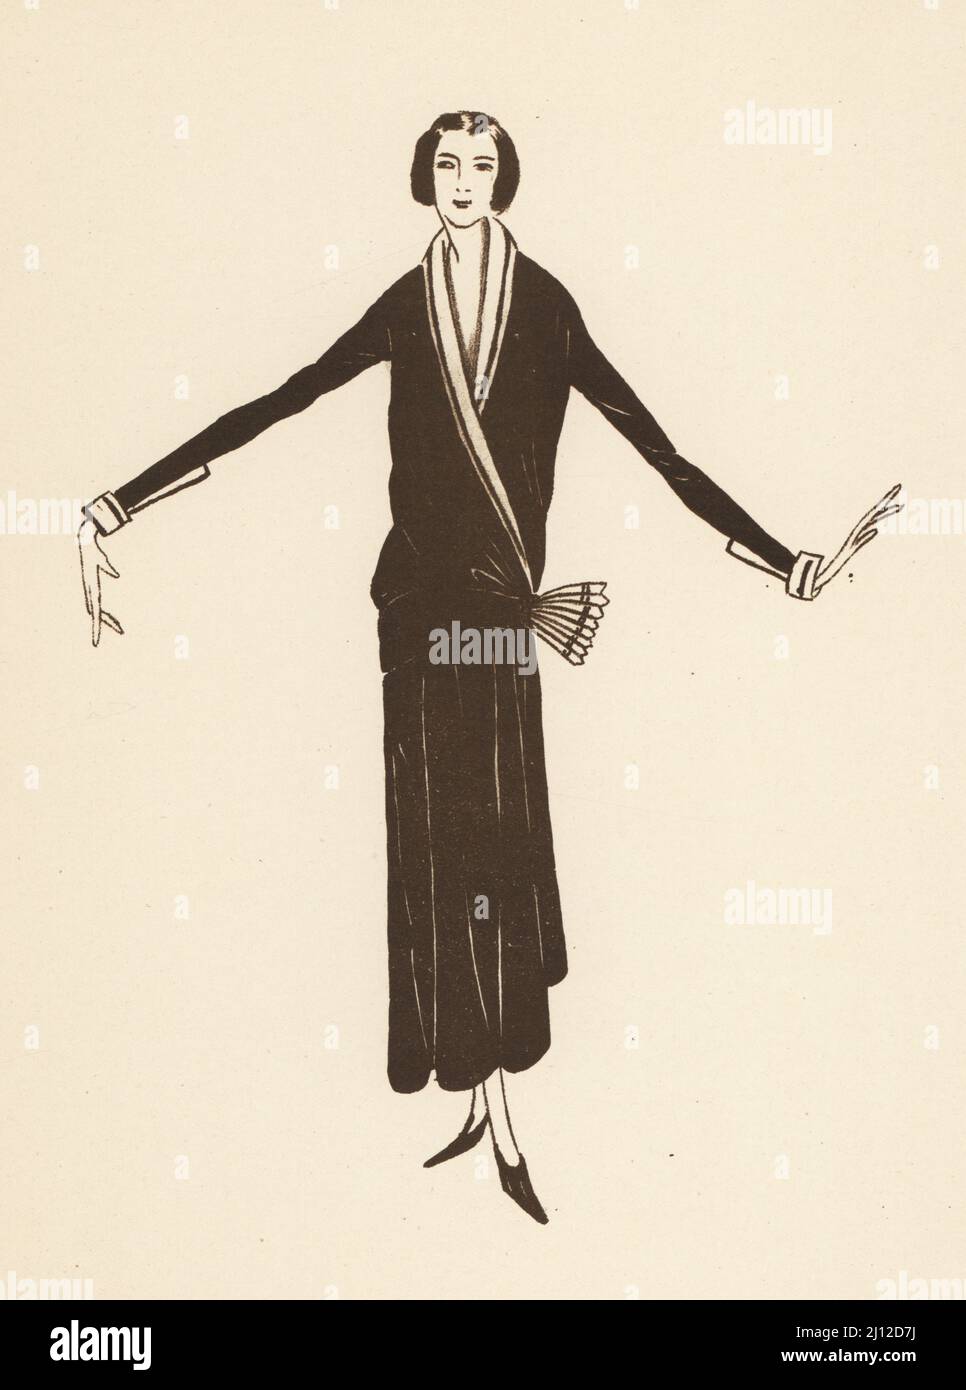 Fashionable woman in a kimono-style coat dress, 1920s. Robe manteau de Jean  Patou. Lithograph by Marcel Bry after a sketch by Jean Patou from Raymonde  See's Le Costume de la Revolution a